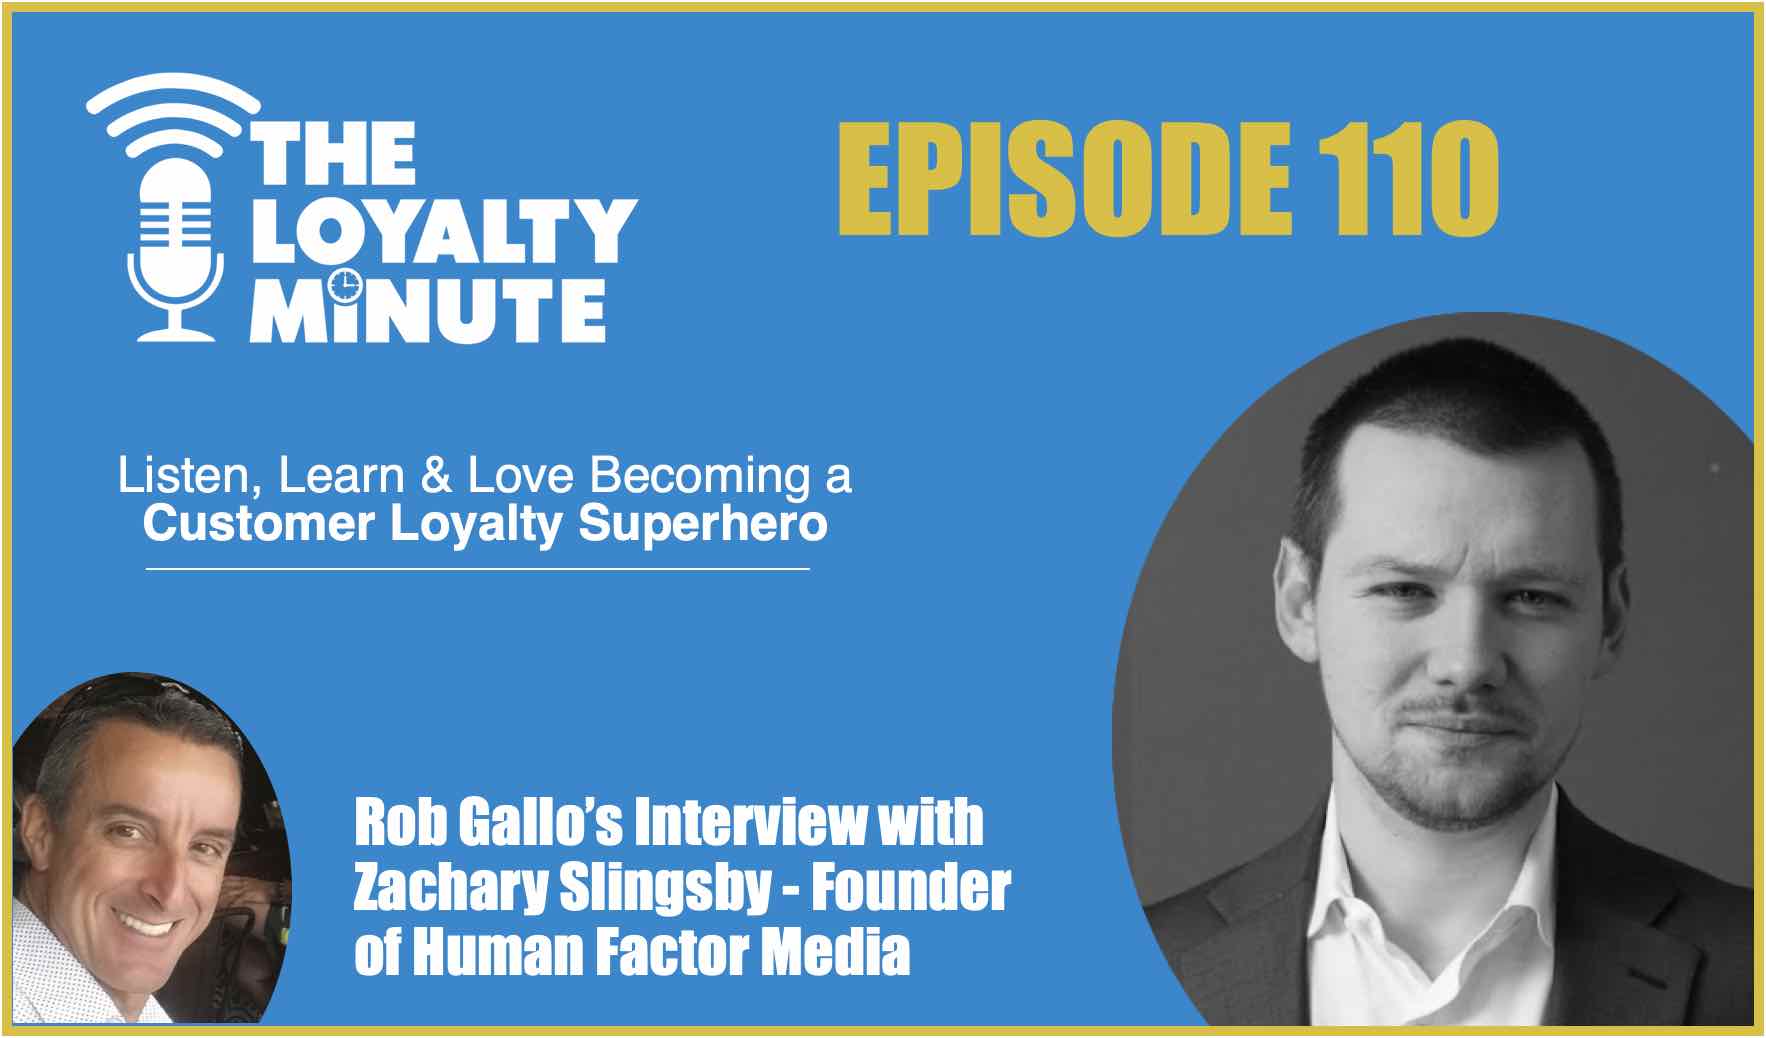 Episode 110 – (Interview) with Zachary Slingsby – Founder of Human Factor Media